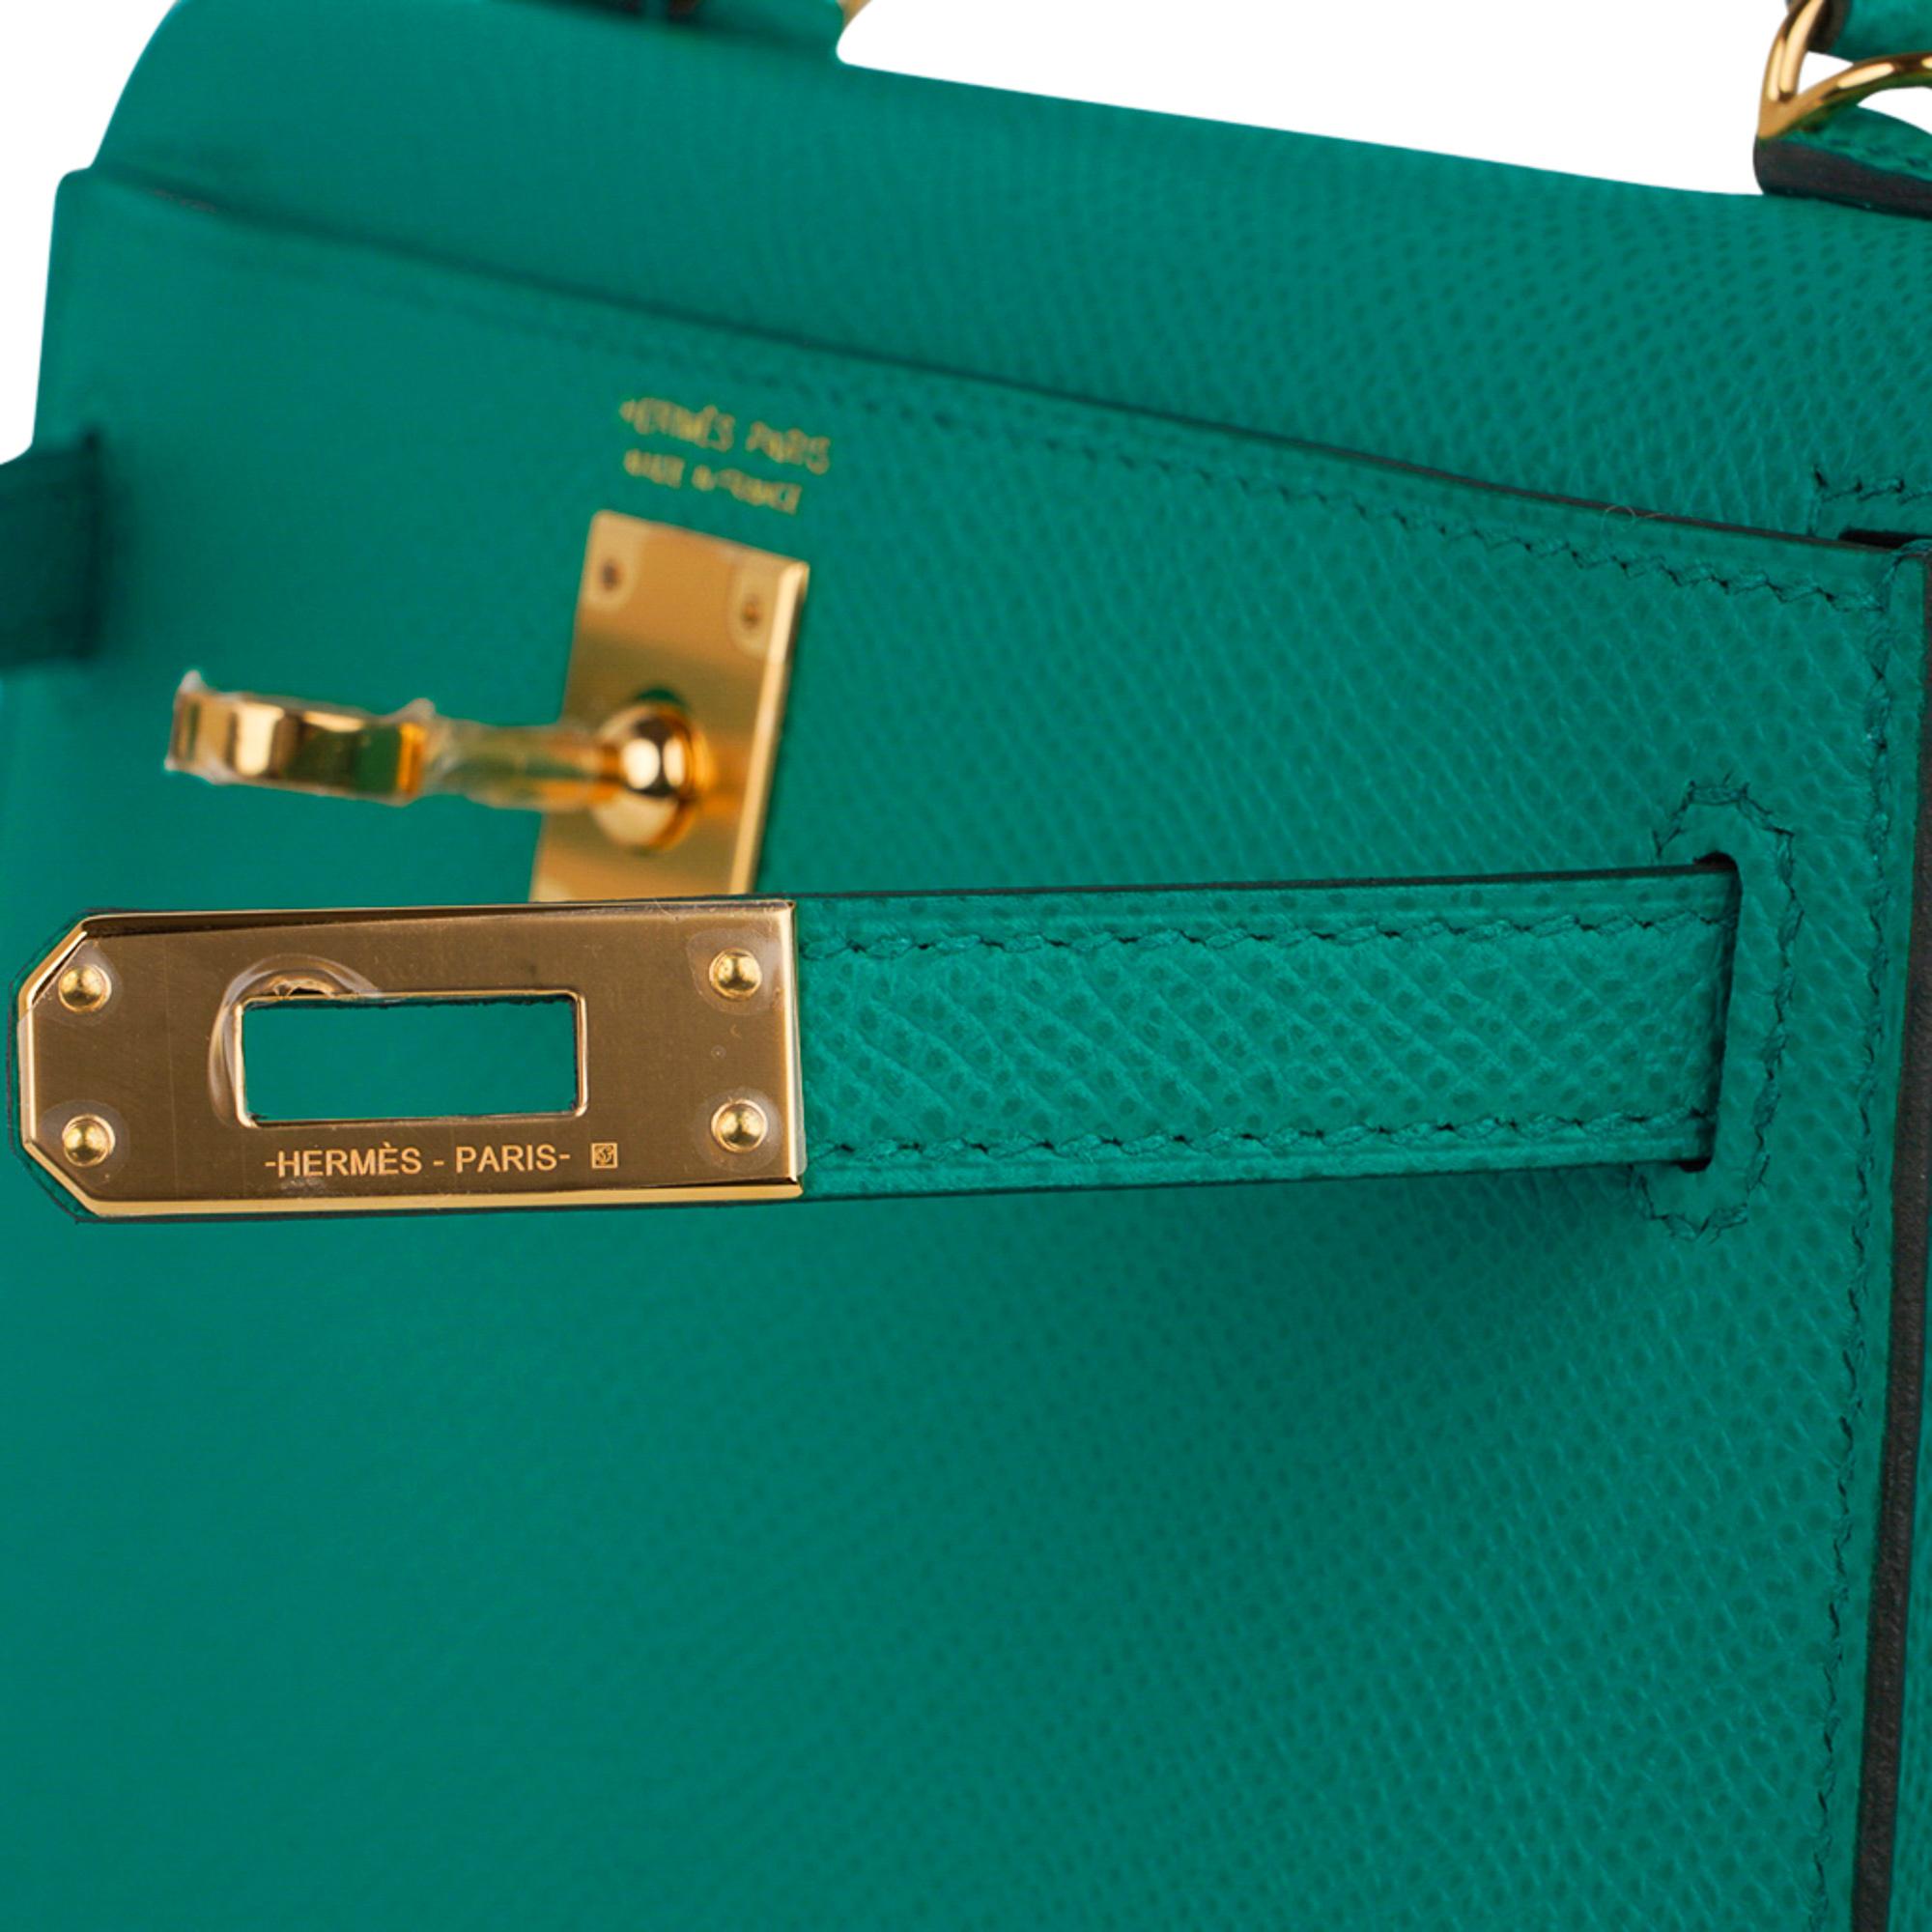 Mightychic offers a guaranteed authentic Hermes Kelly 20 Mini Sellier bag featured in spectacular Jade.
Espom leather accentuated with Gold hardware.
Comes with signature Hermes box, shoulder strap, and sleeper.
Please see our Kelly 20 Collection